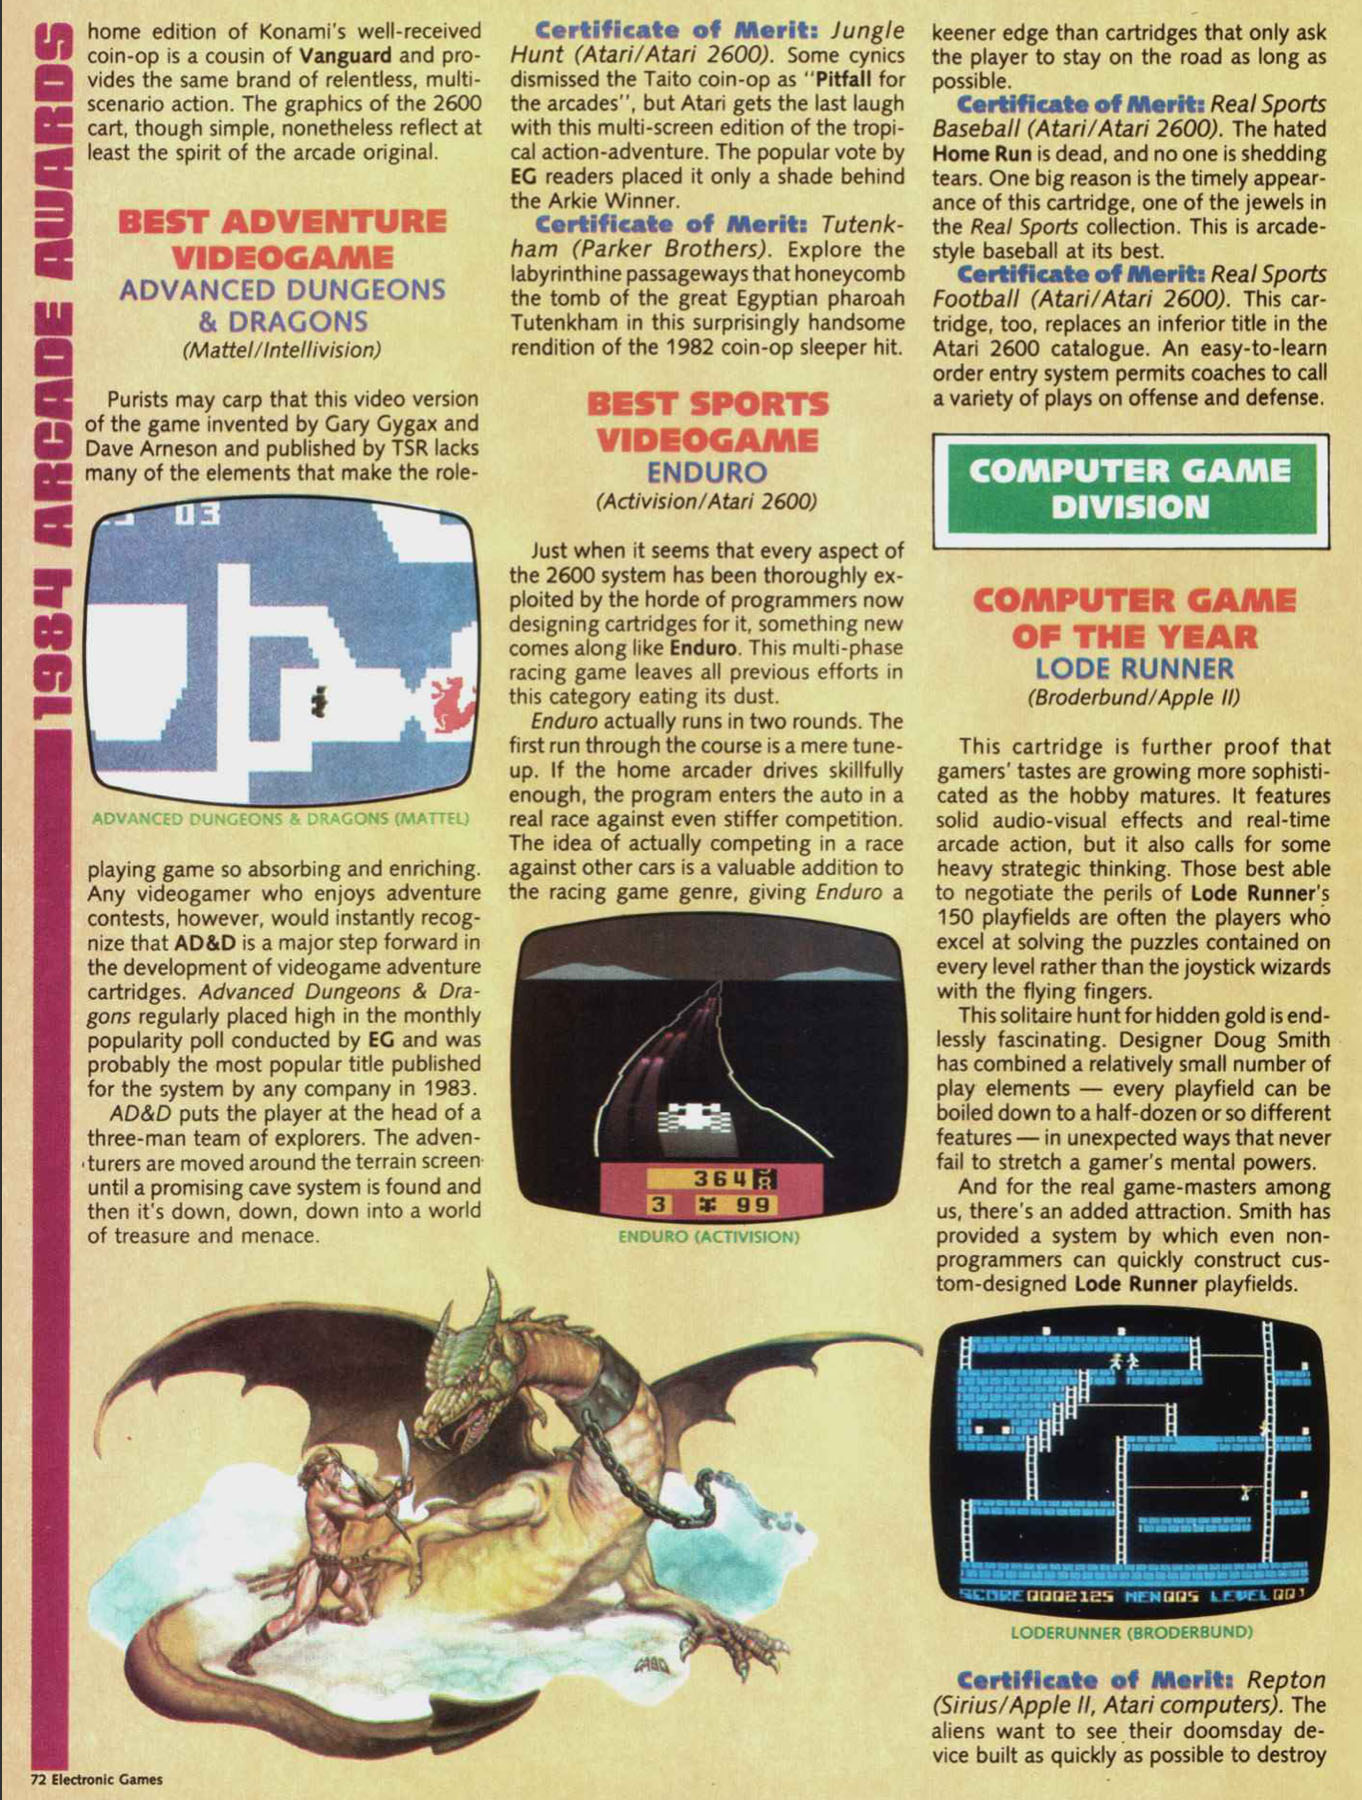 1984 Arcade Awards, Electronic Games January 1984 page 72